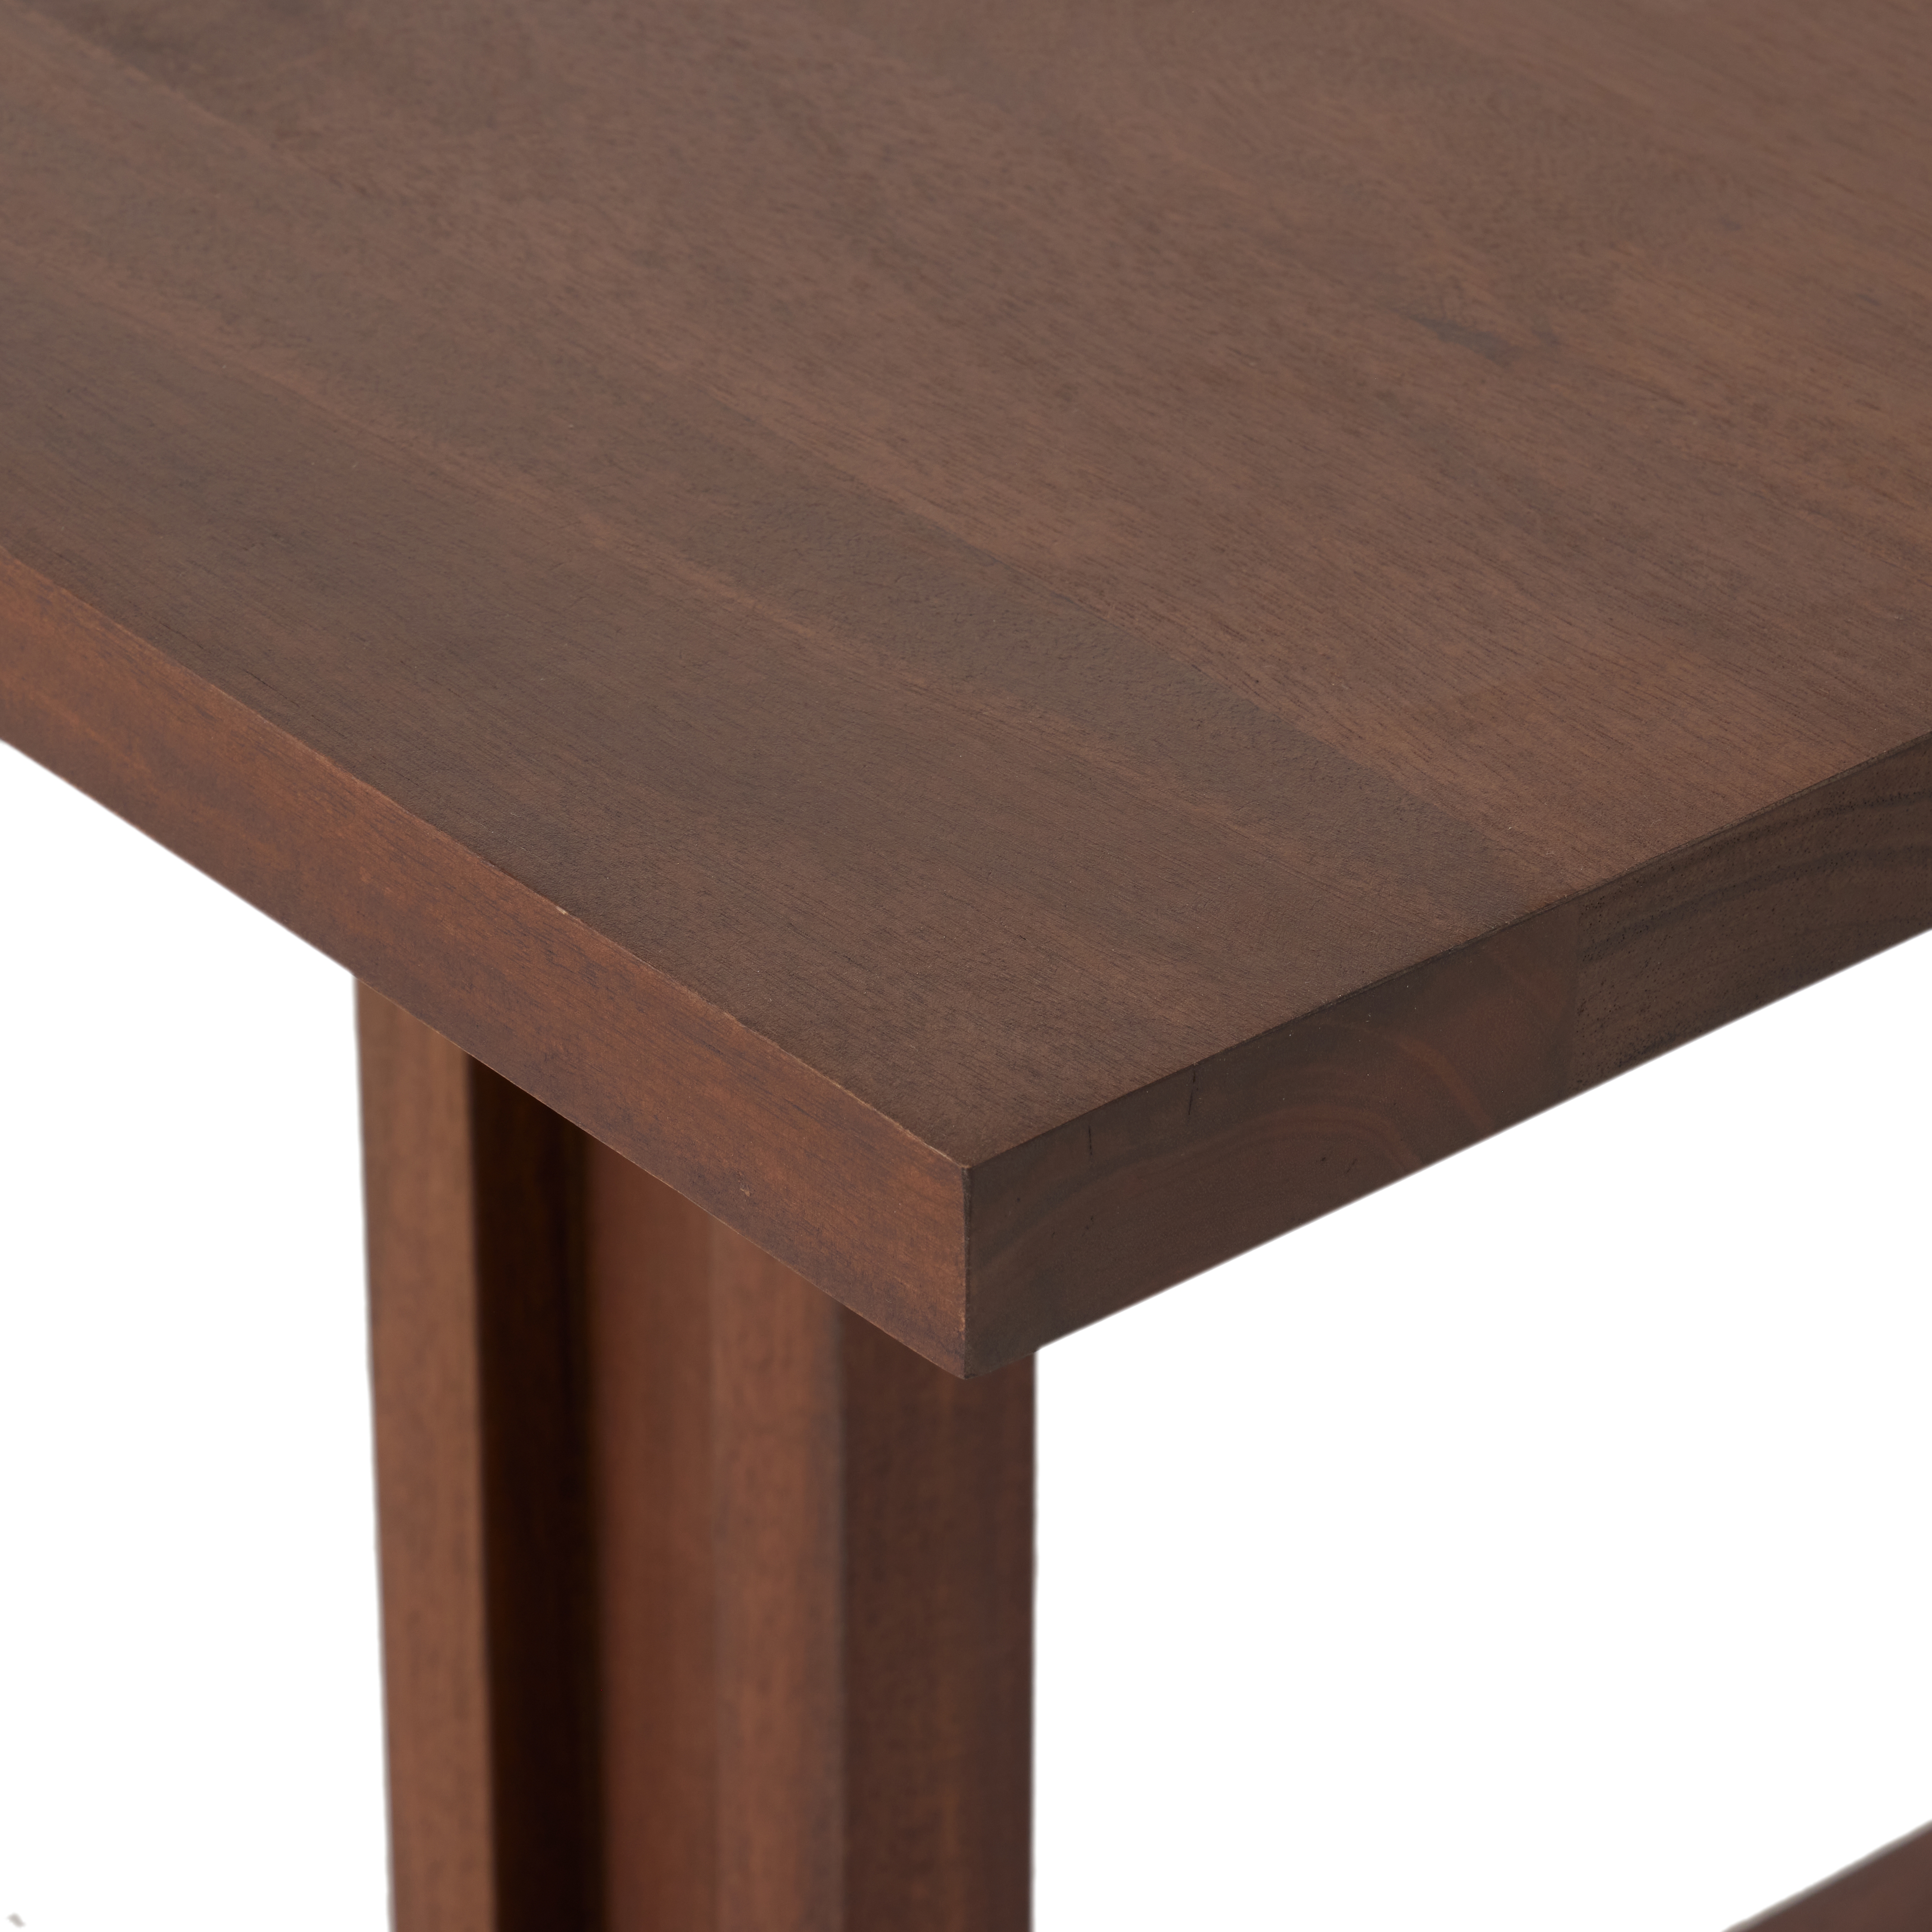 Carmel Dining Table-Brown Wash - Image 2